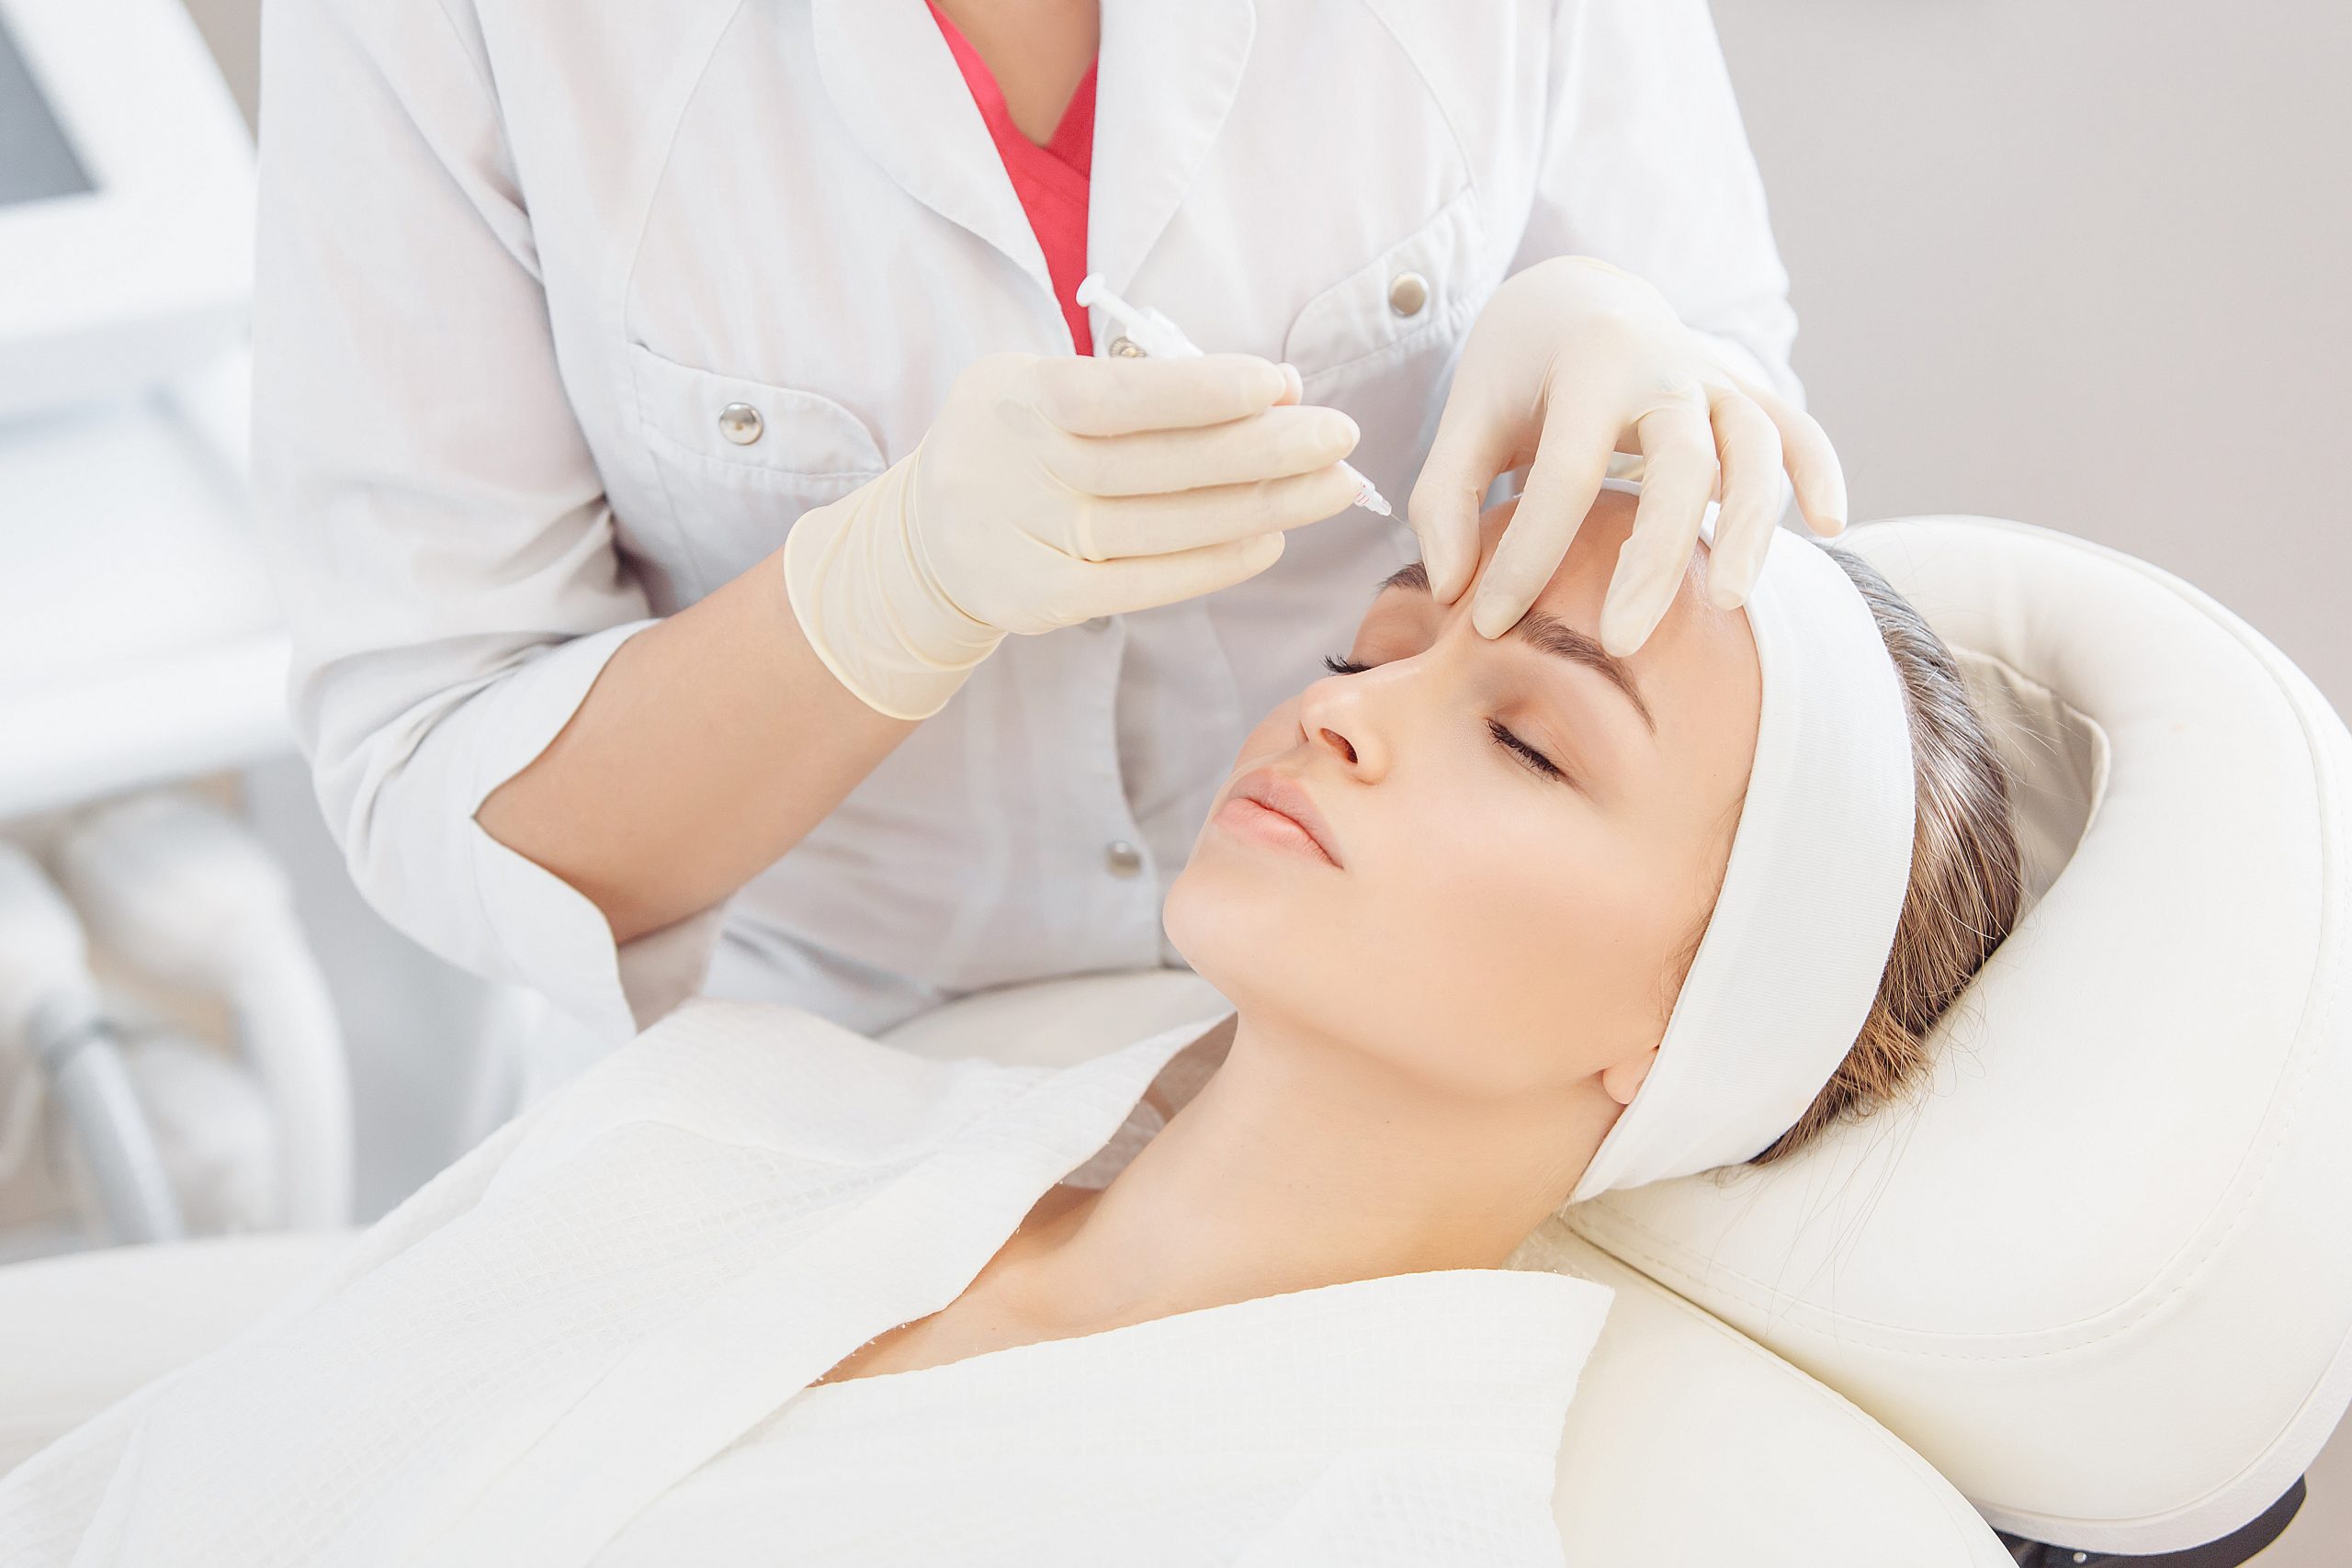 How Do I Get Certified In Botox And Fillers Woburn MA